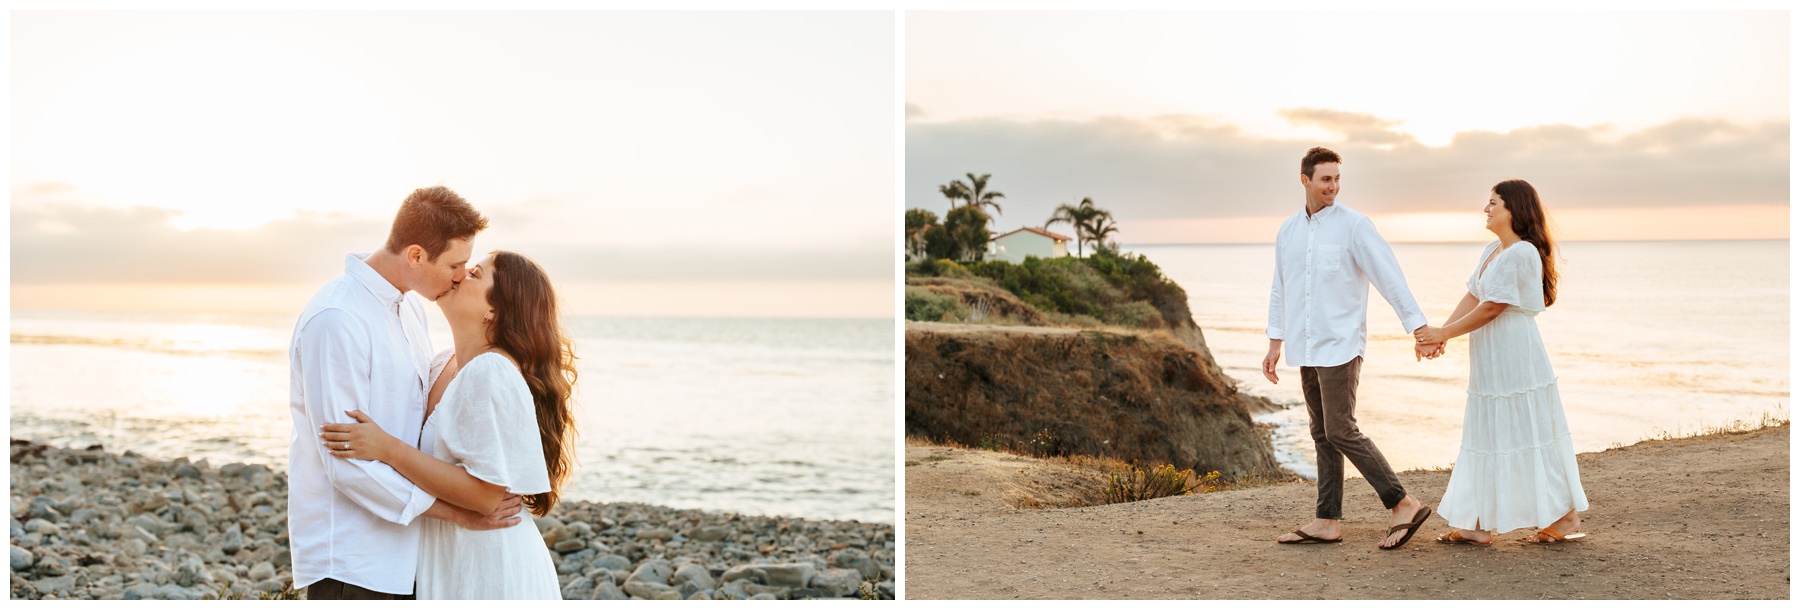 romantic sunset engagement photos in Southern California